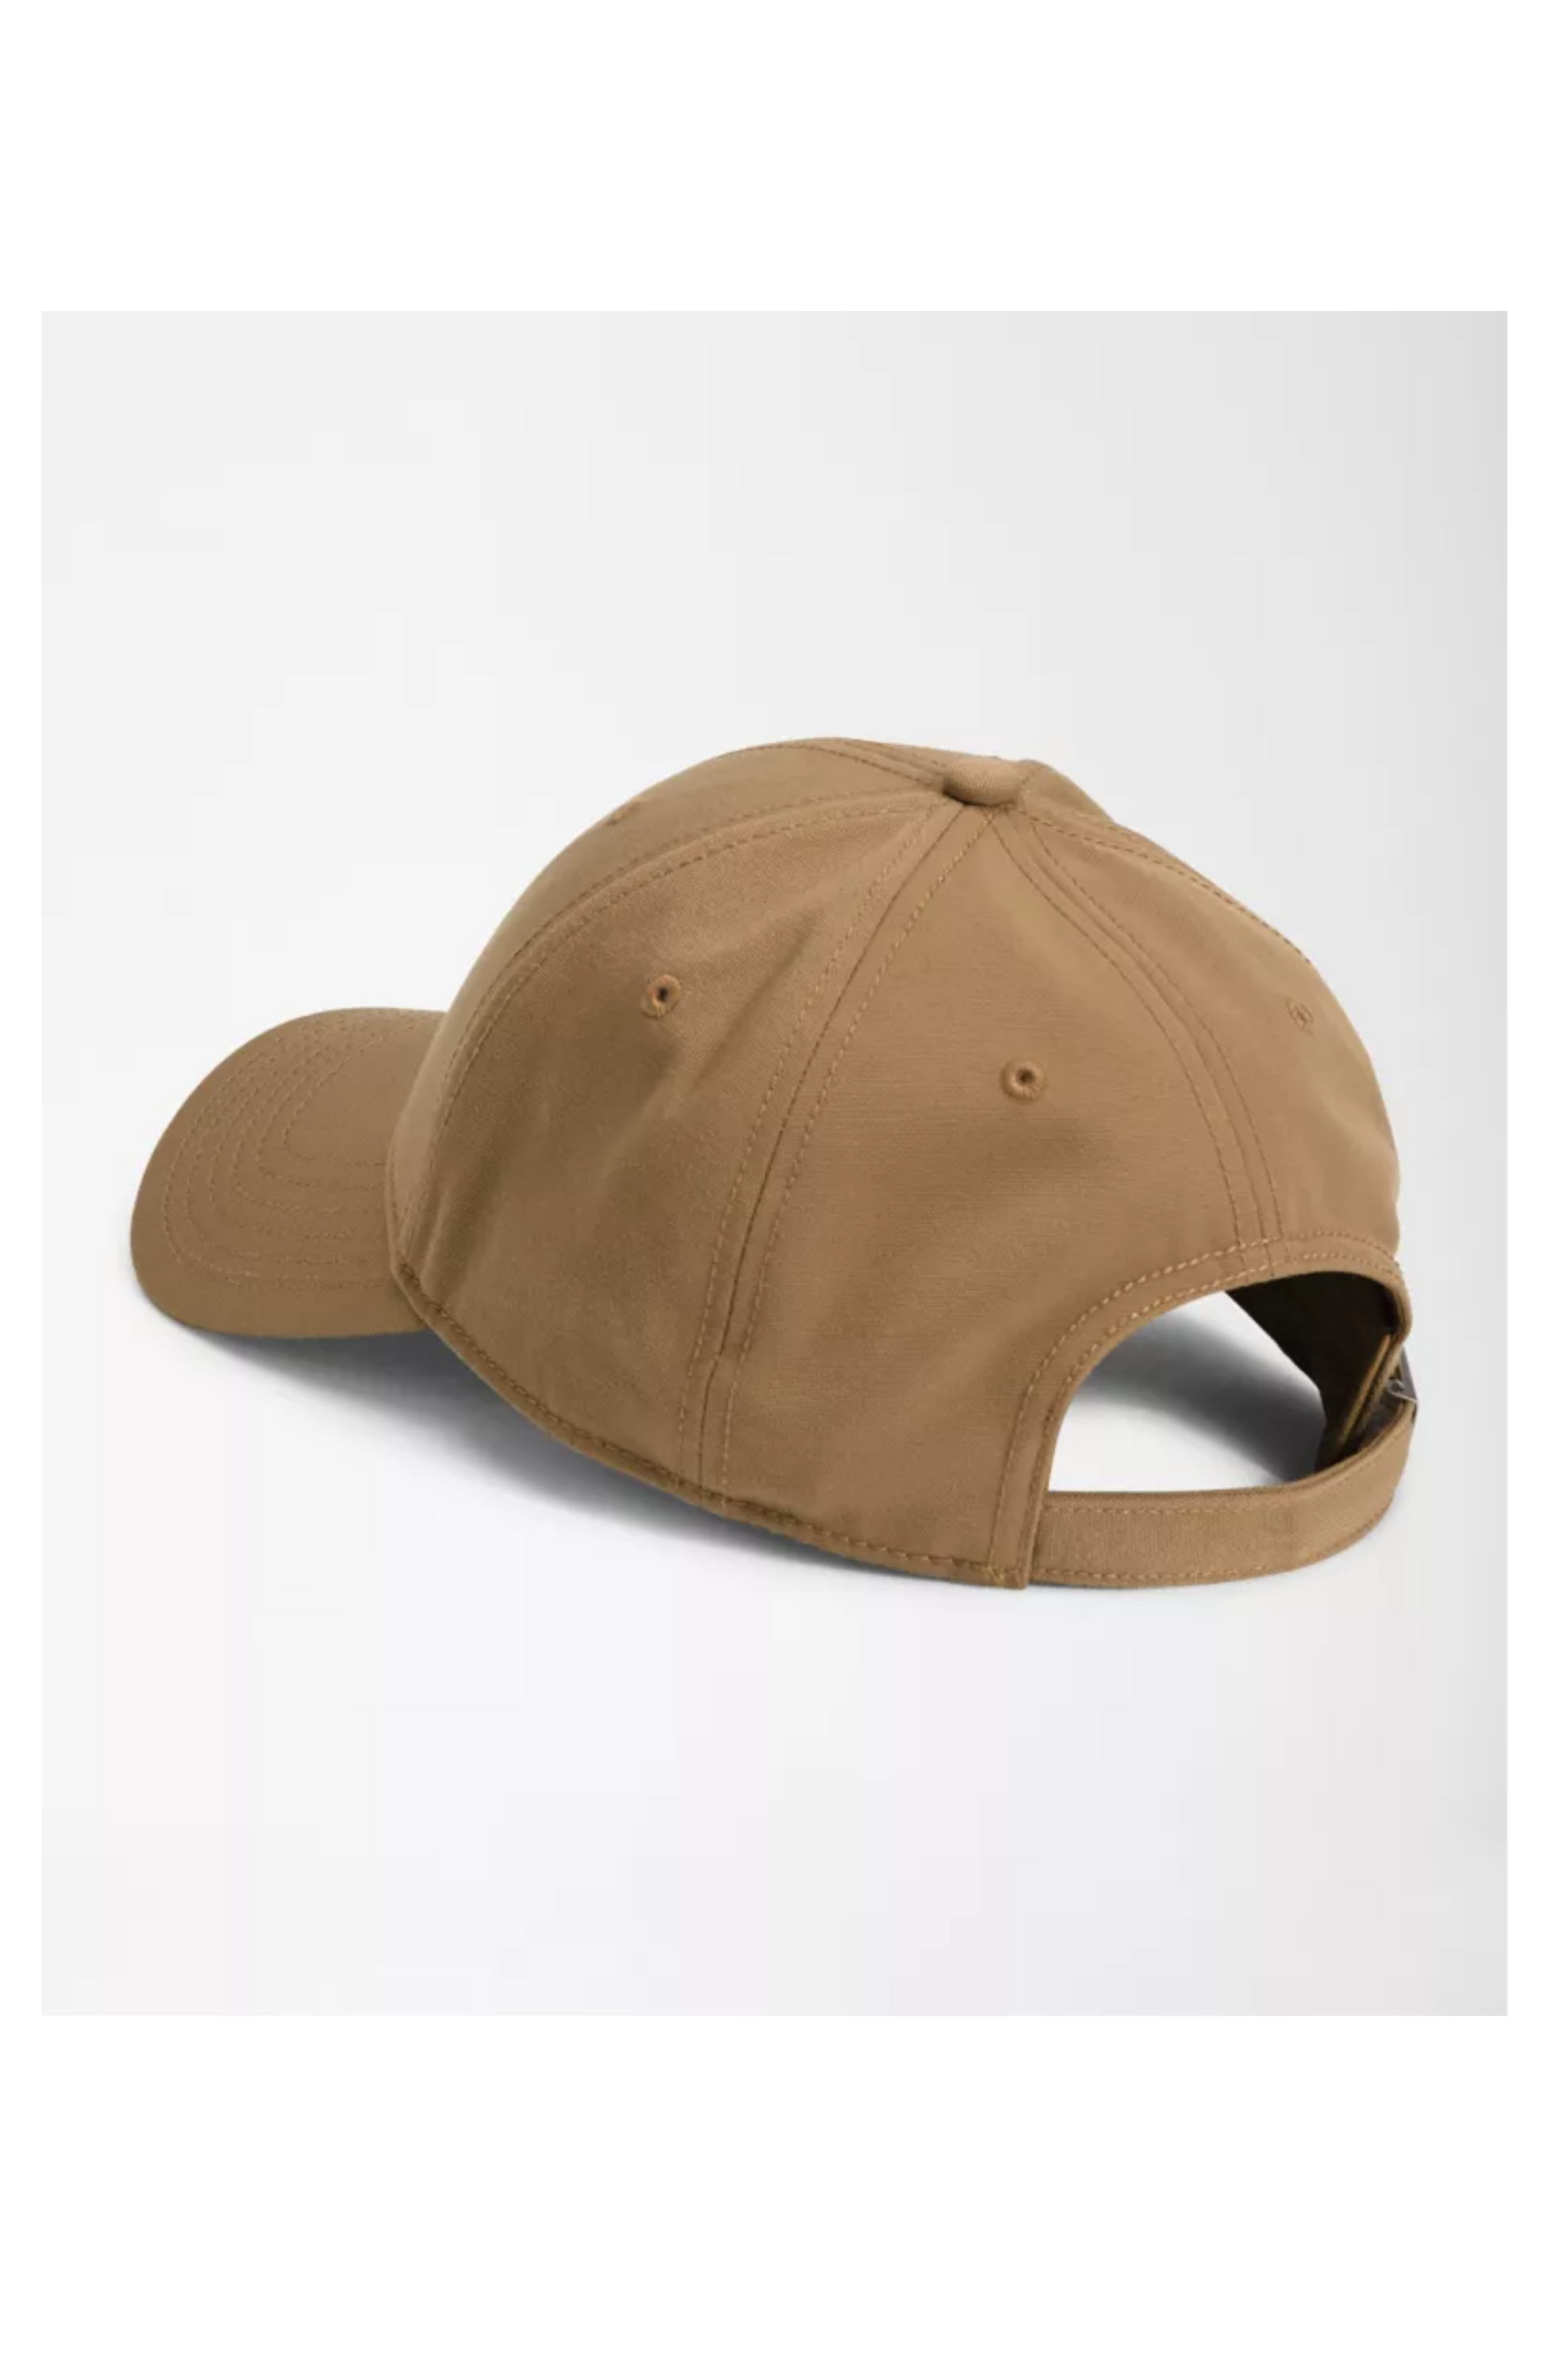 Hotelomega Sneakers Sale Online, Casquette Rcyd 66 Classic Hat